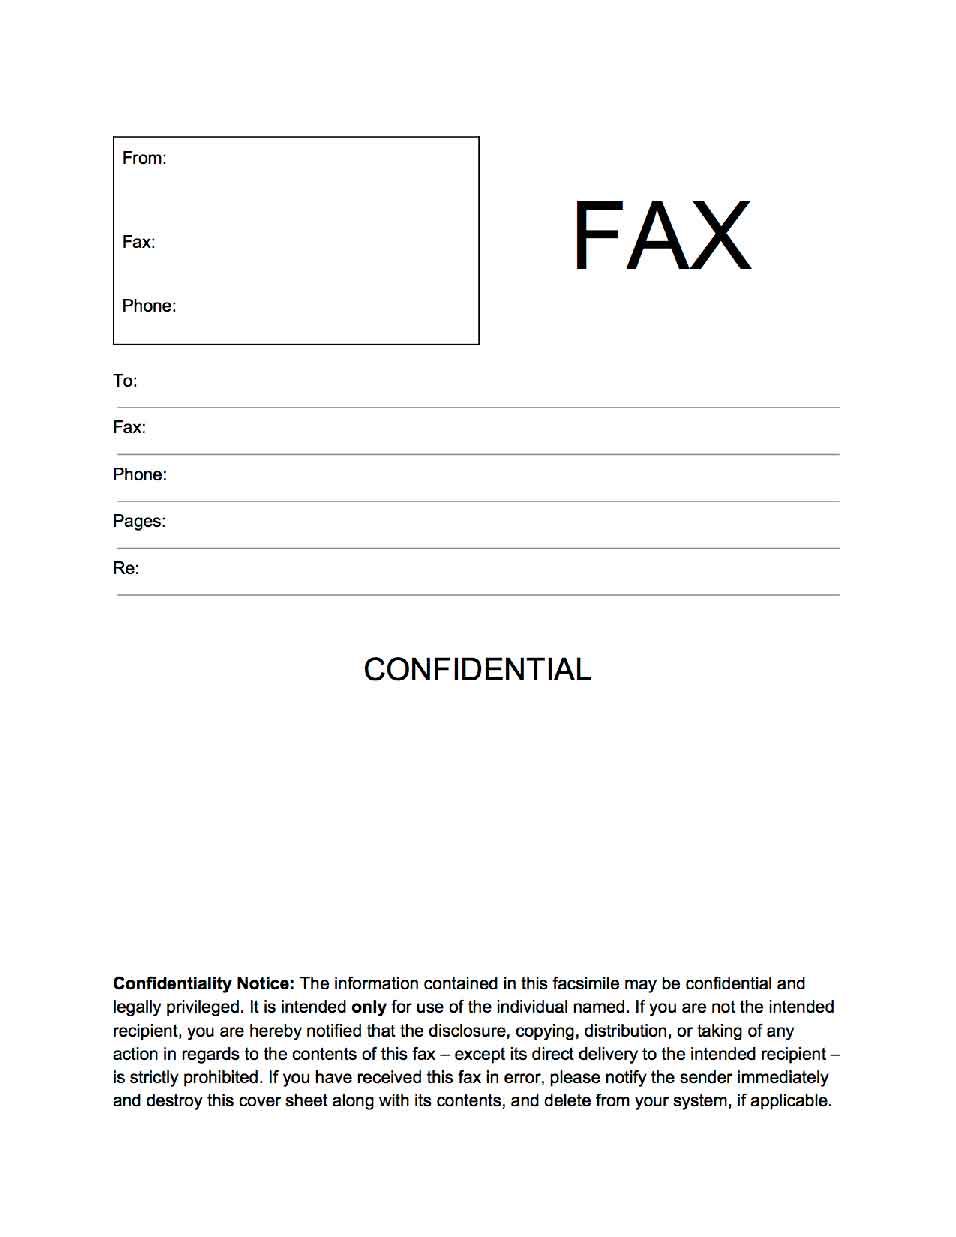 Confidential Fax Cover Sheet Template Printable Fax Cover Sheets Cover Sheet Template Fax Cover Sheet Cover Letter Sample